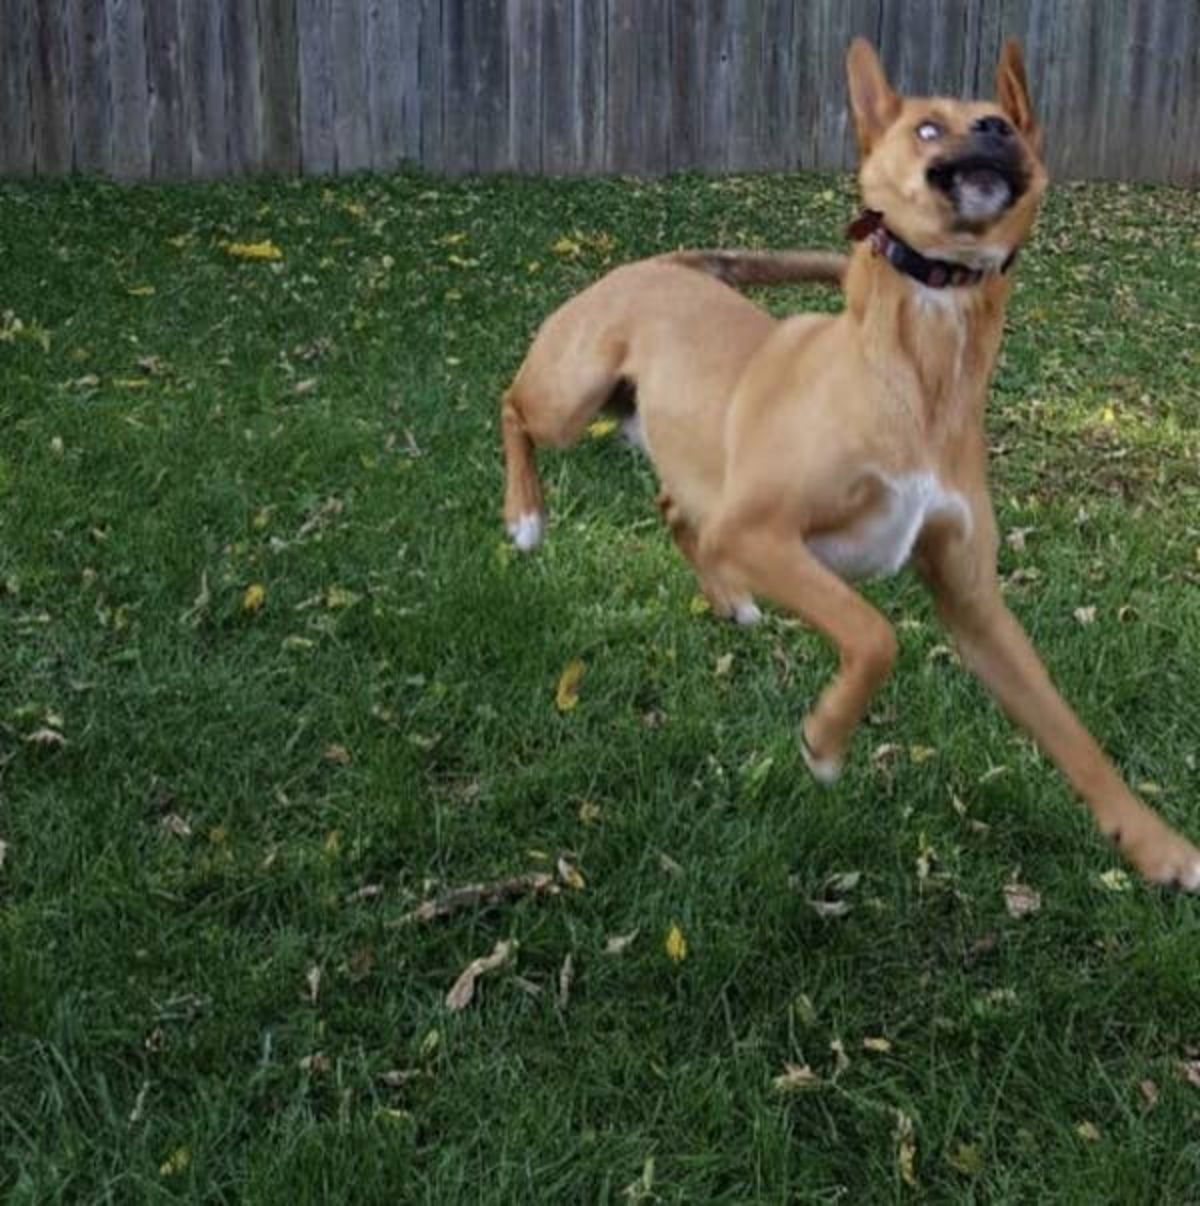 brown and white dog with a black collar caught mid-jump on grass